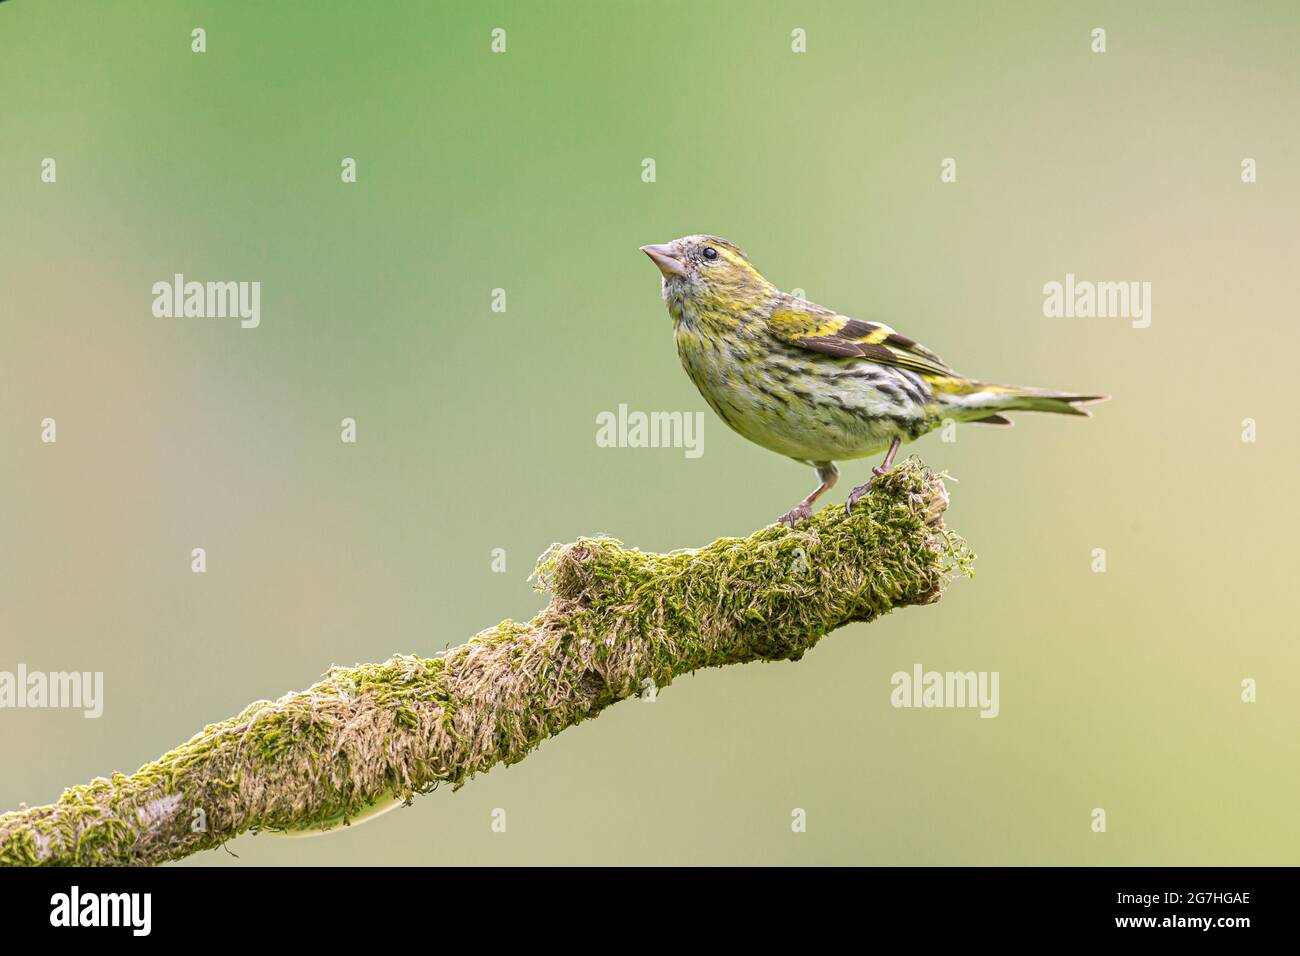 Juvenile Goldfinch perched on a branch. Stock Photo